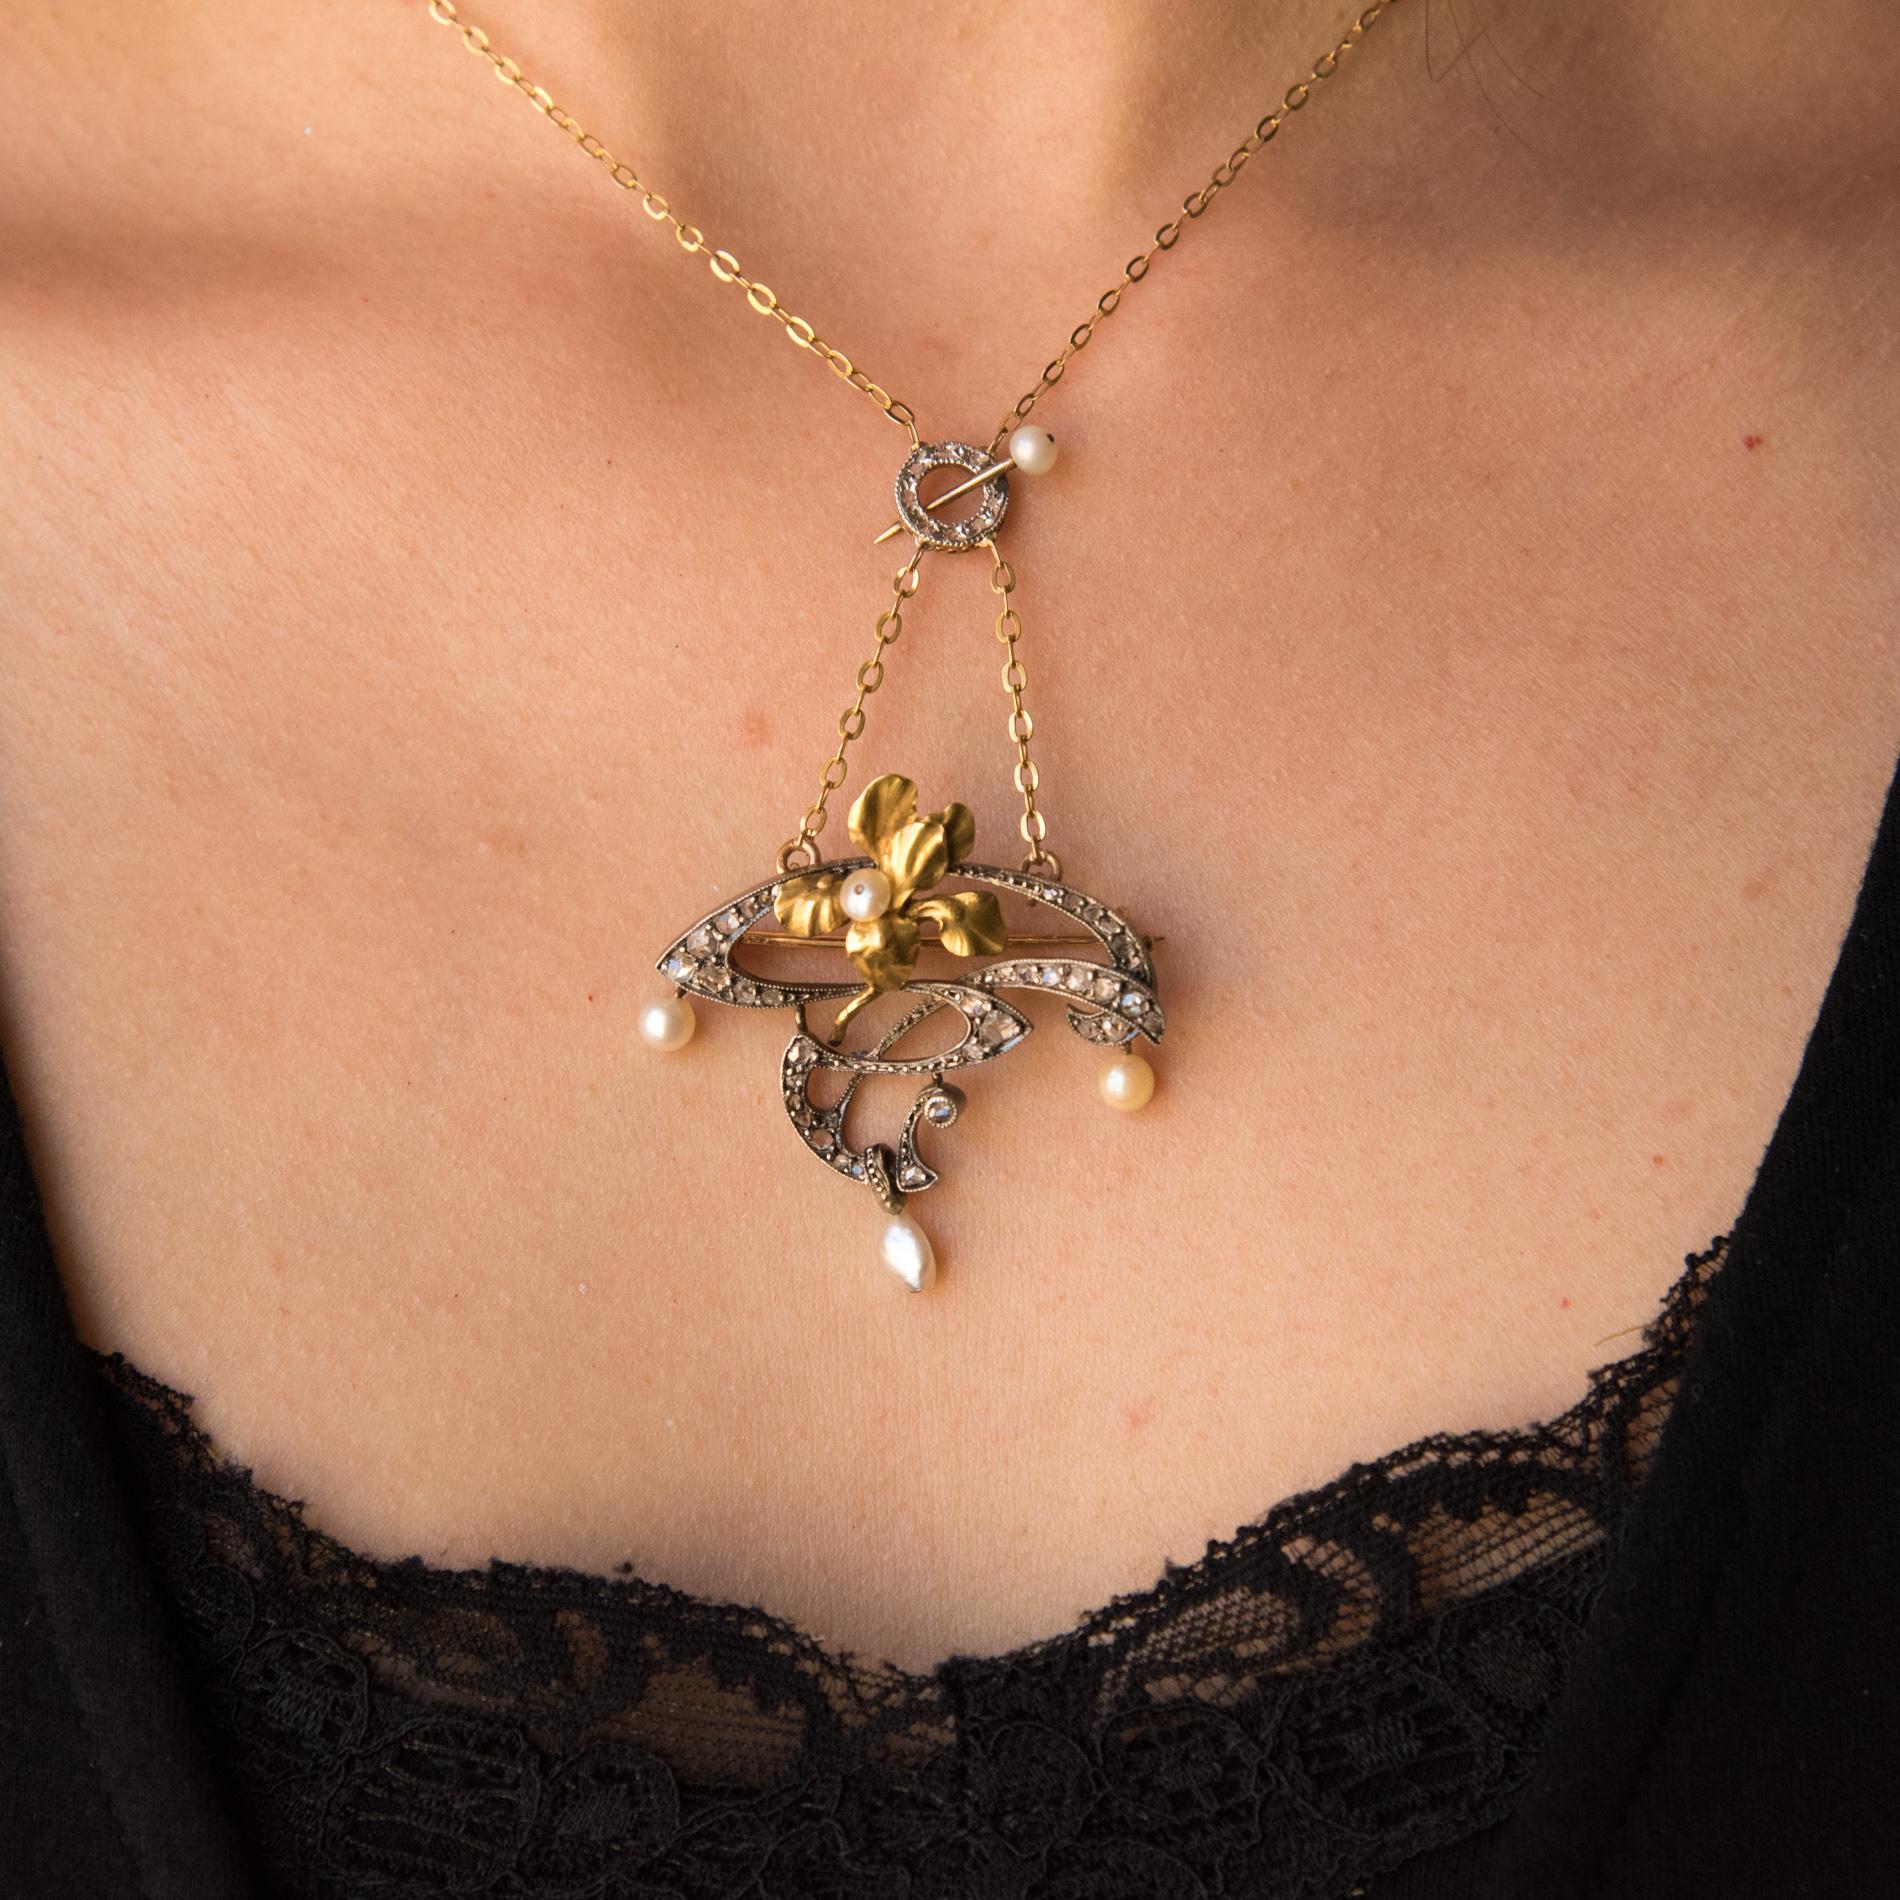 18 carat yellow gold and silver necklace eagle's head hallmark.
Featuring an openwork floral design set with rose cut diamonds. The necklace features a yellow gold Iris motif set with a fine flat pearl. Suspended from the pendant are 3 white beige